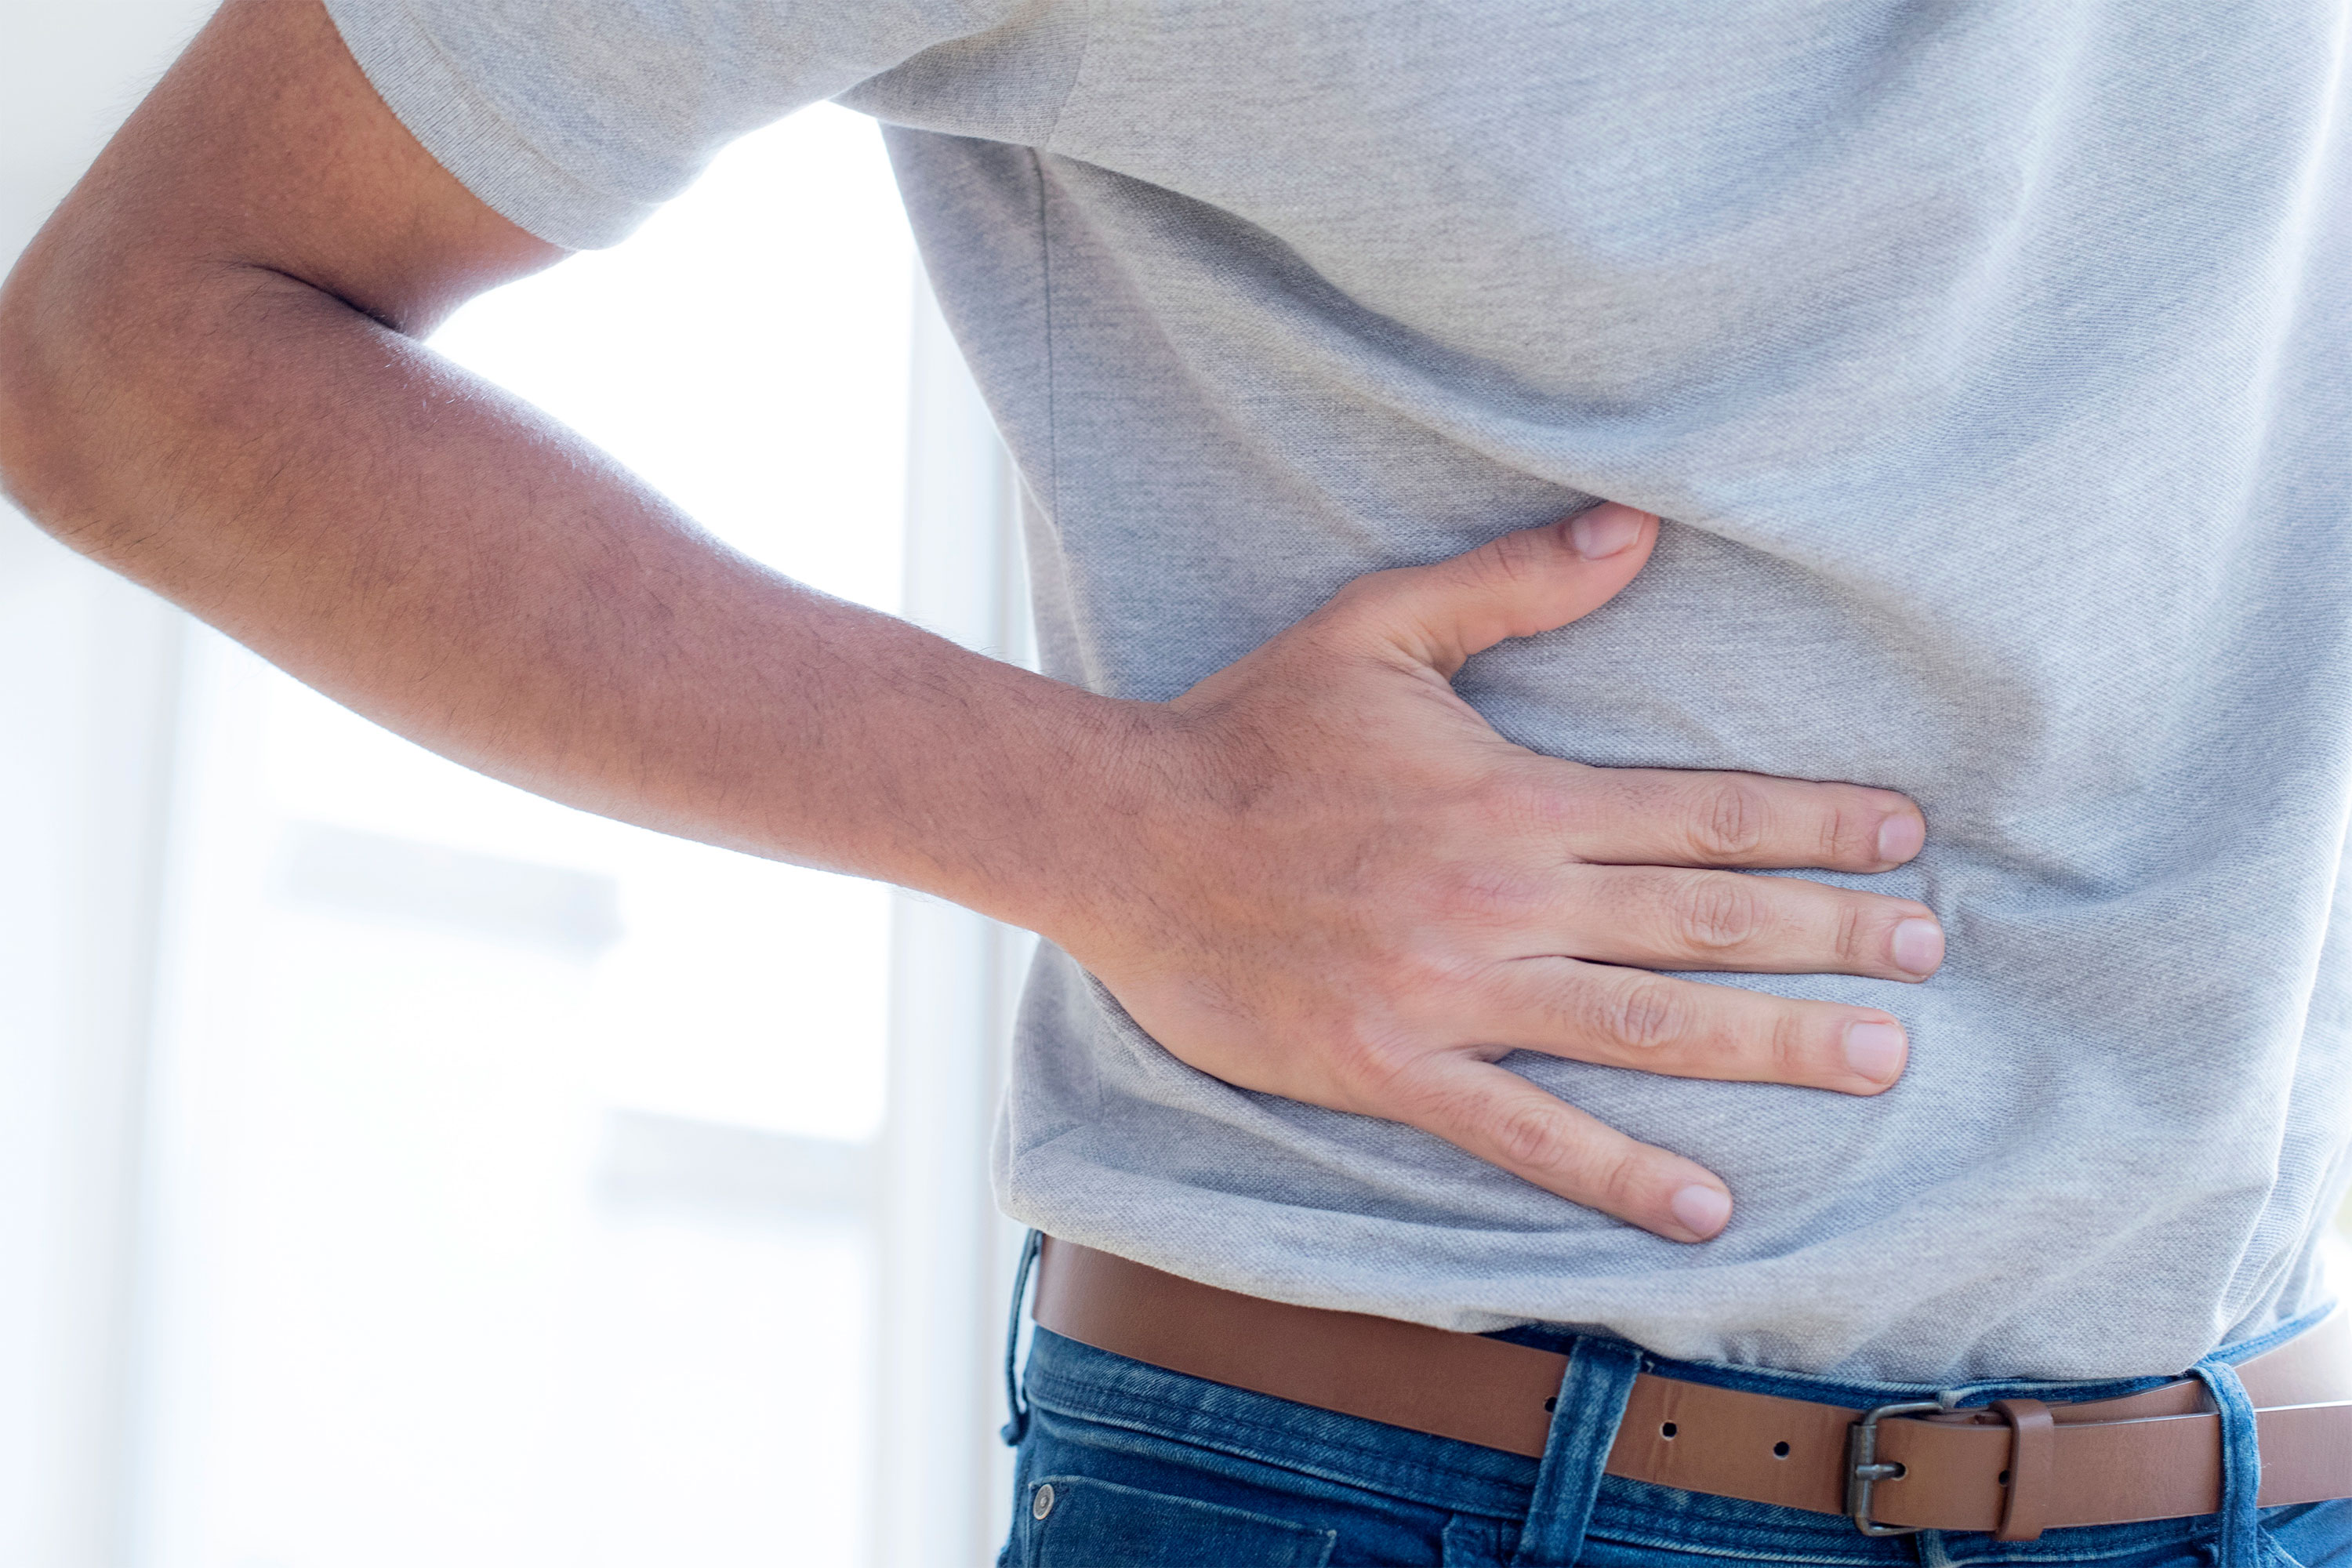 What should be noted for lower abdominal pain in men?